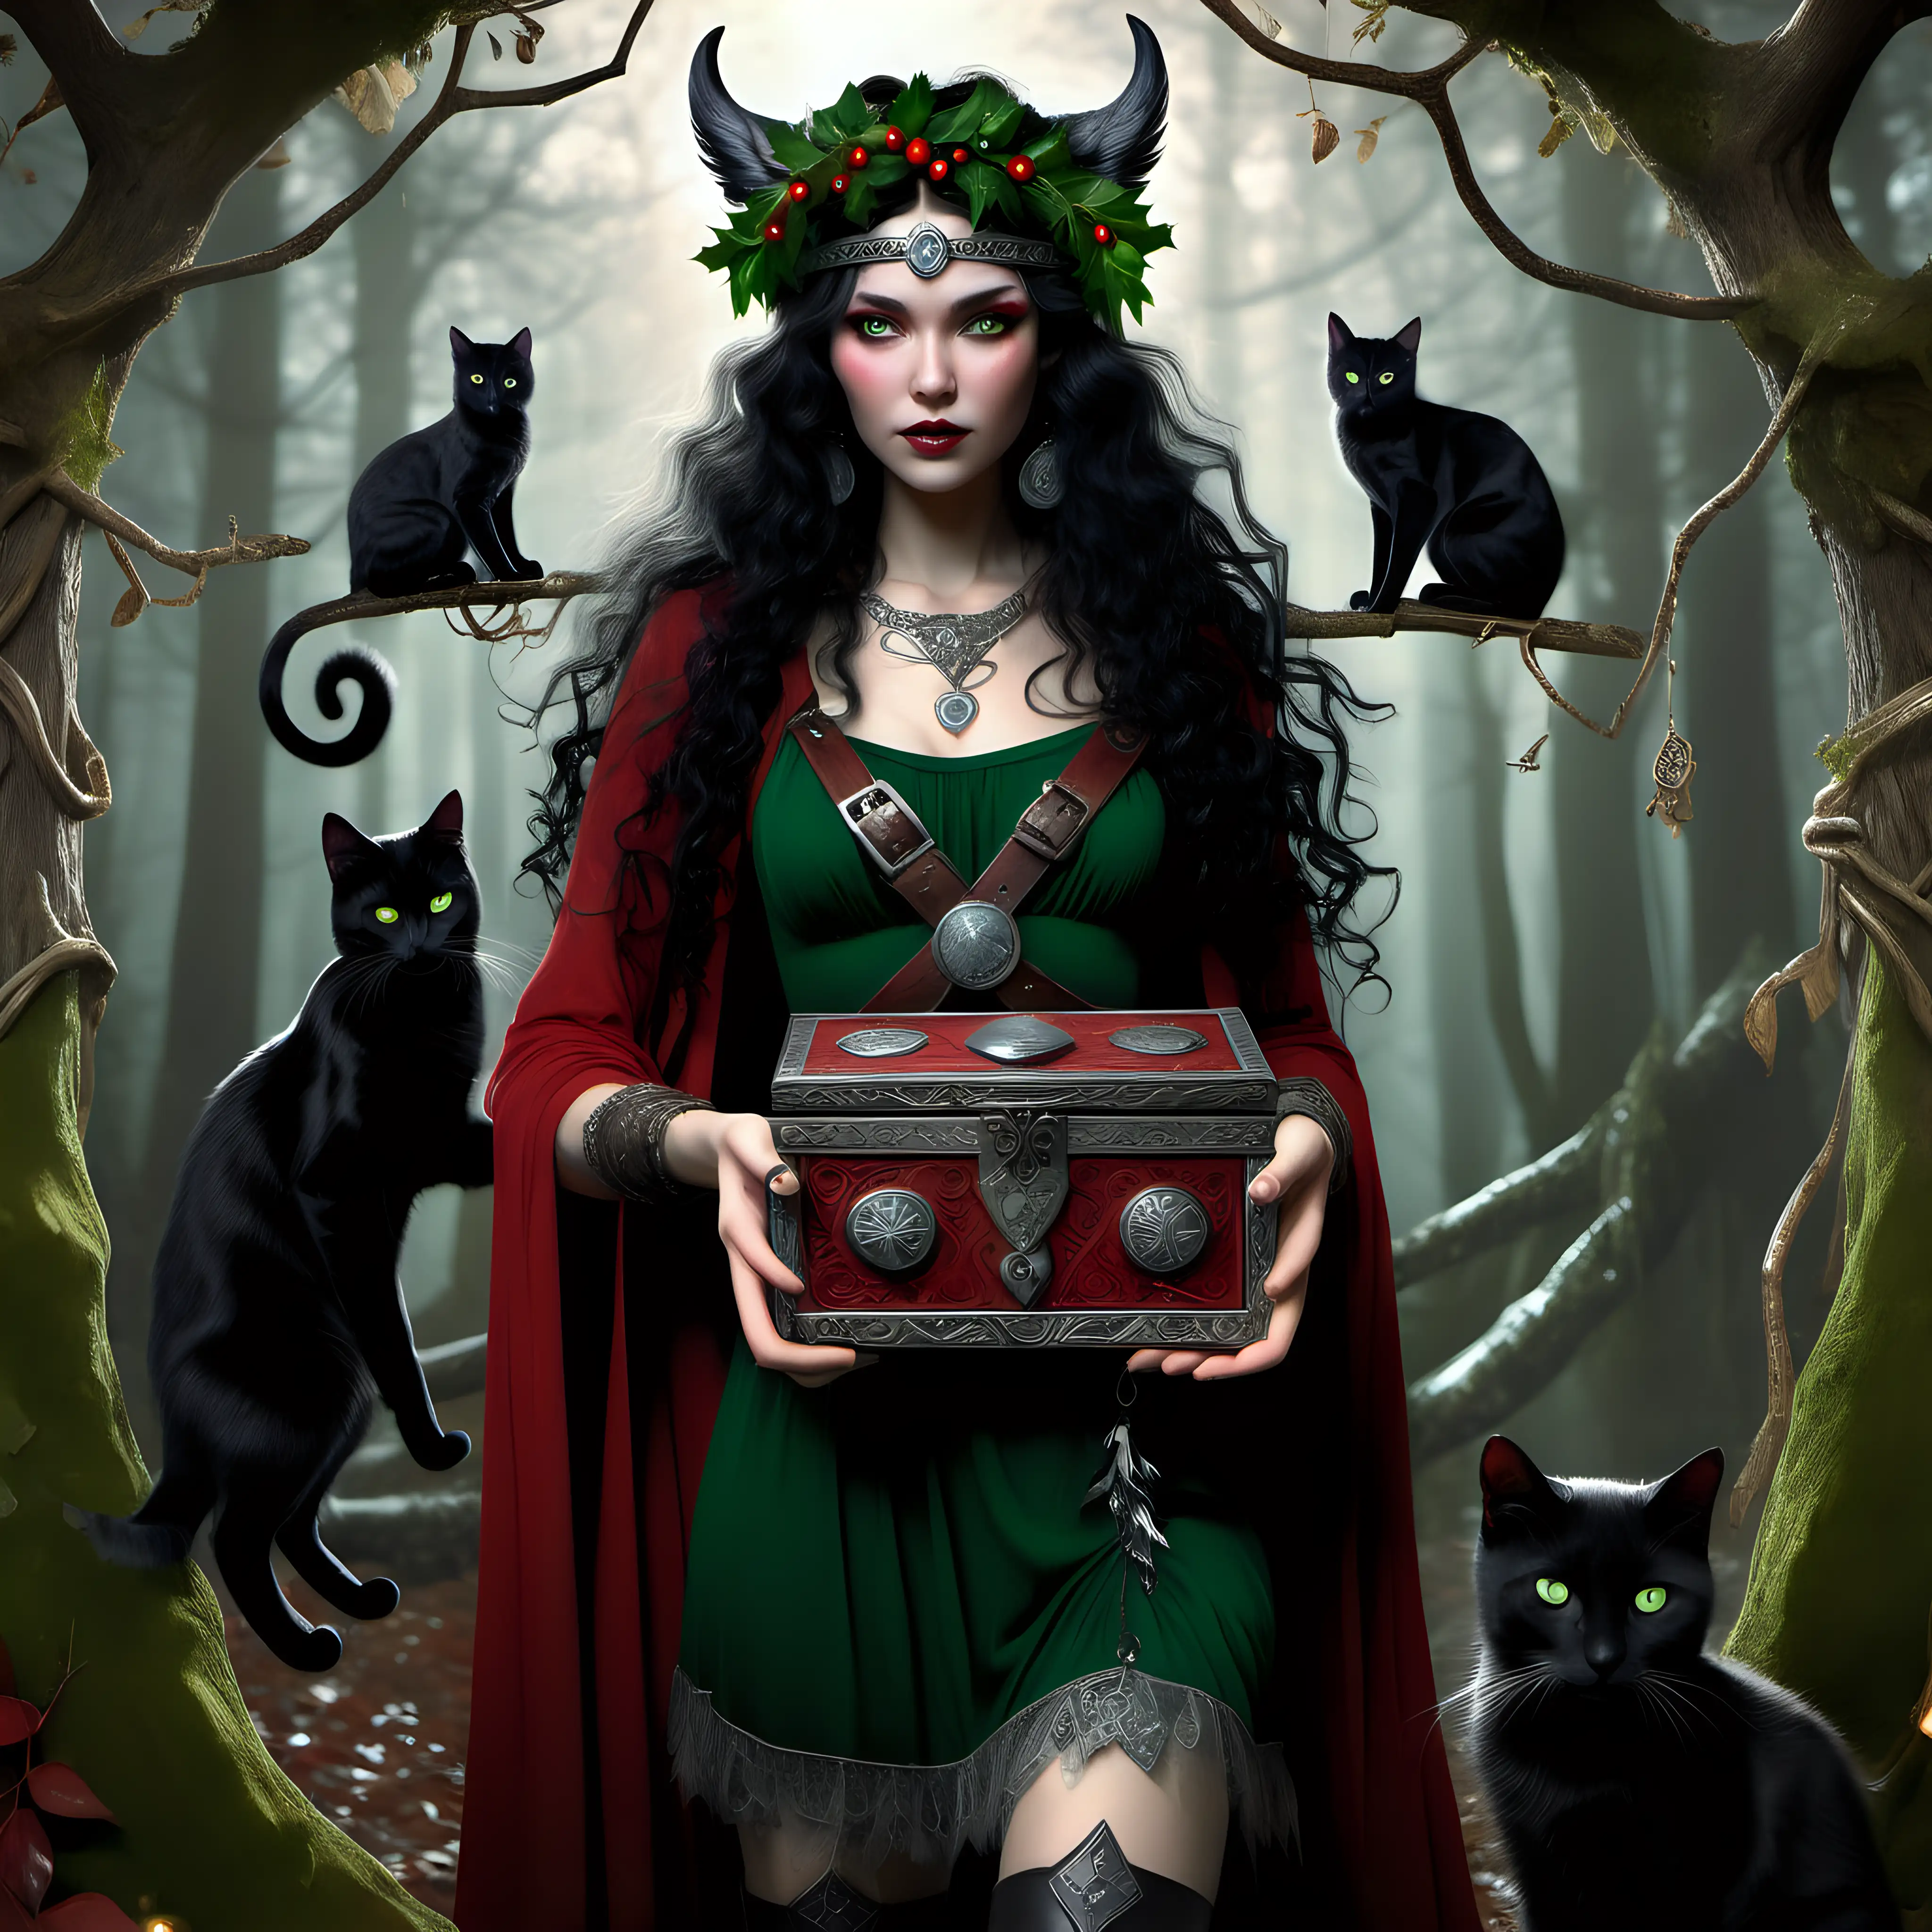 Norse Pagan Woman in Ancient Forest with Mystical Wooden Box and Black Cats